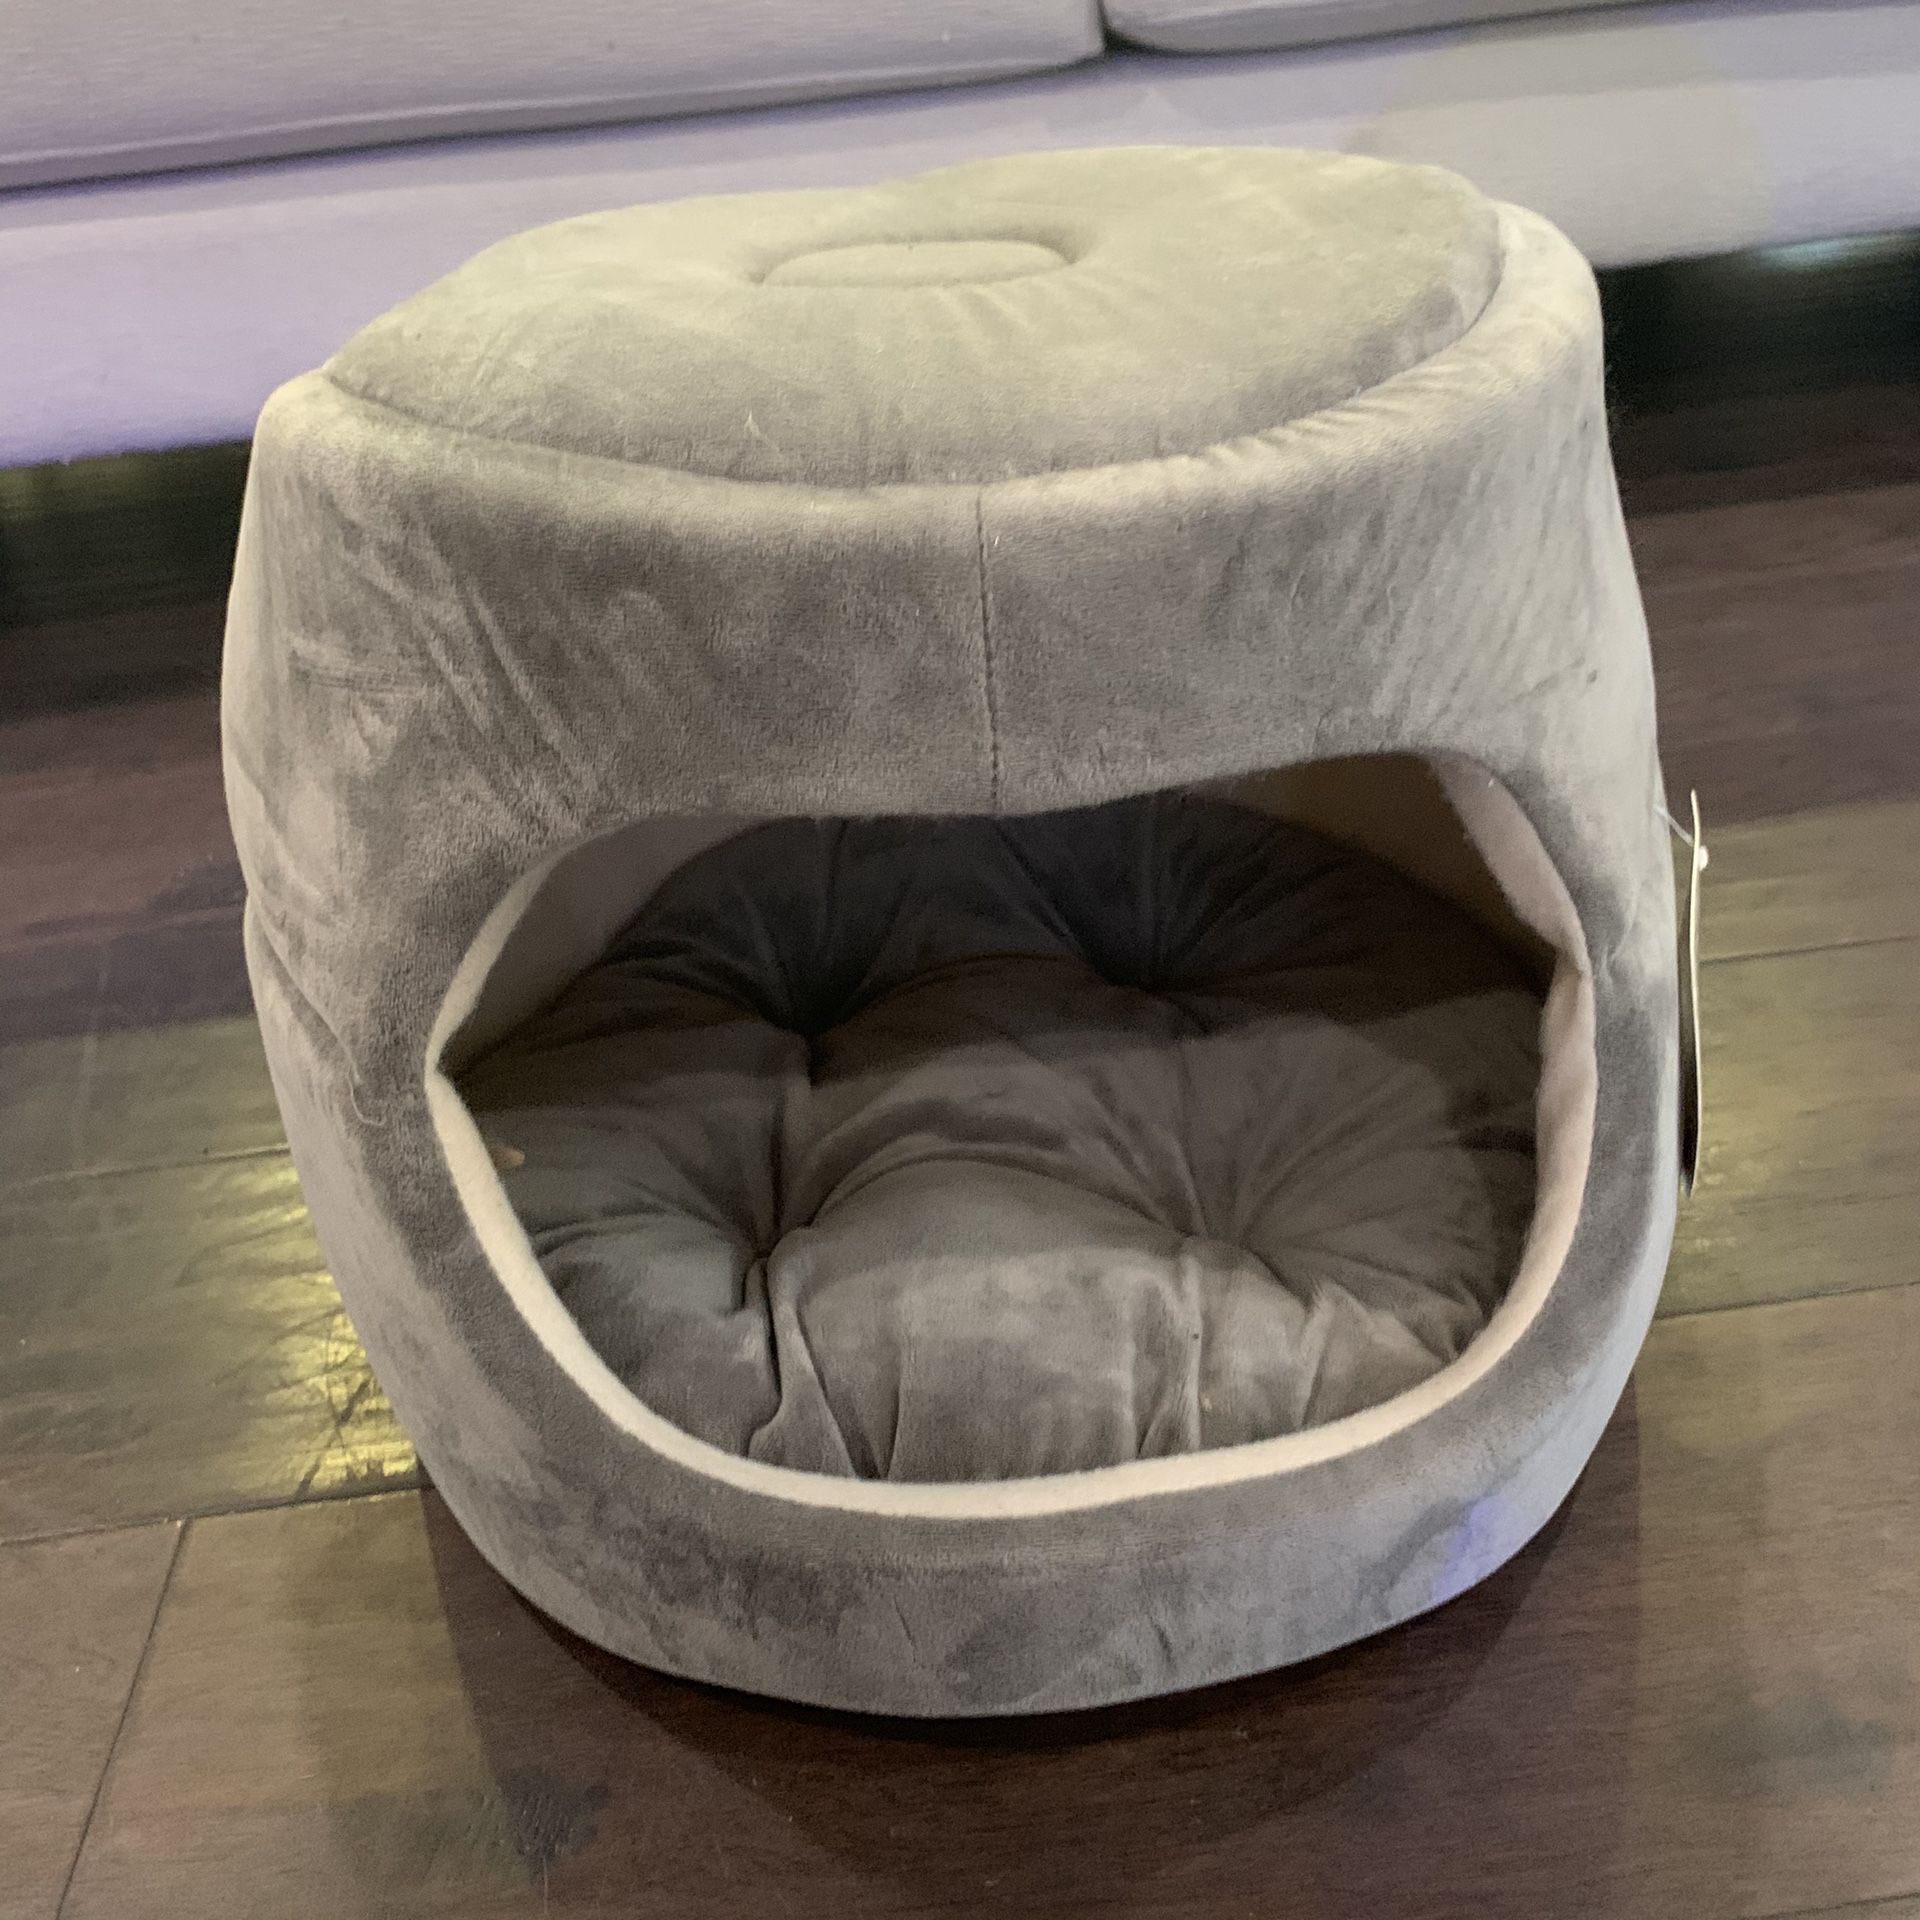 Cute new all in one CAT BED! ❤️ or small dog! Perfect for your kitten/puppy or small dog/cat! Comfy cute home pet bed cave enclosed house